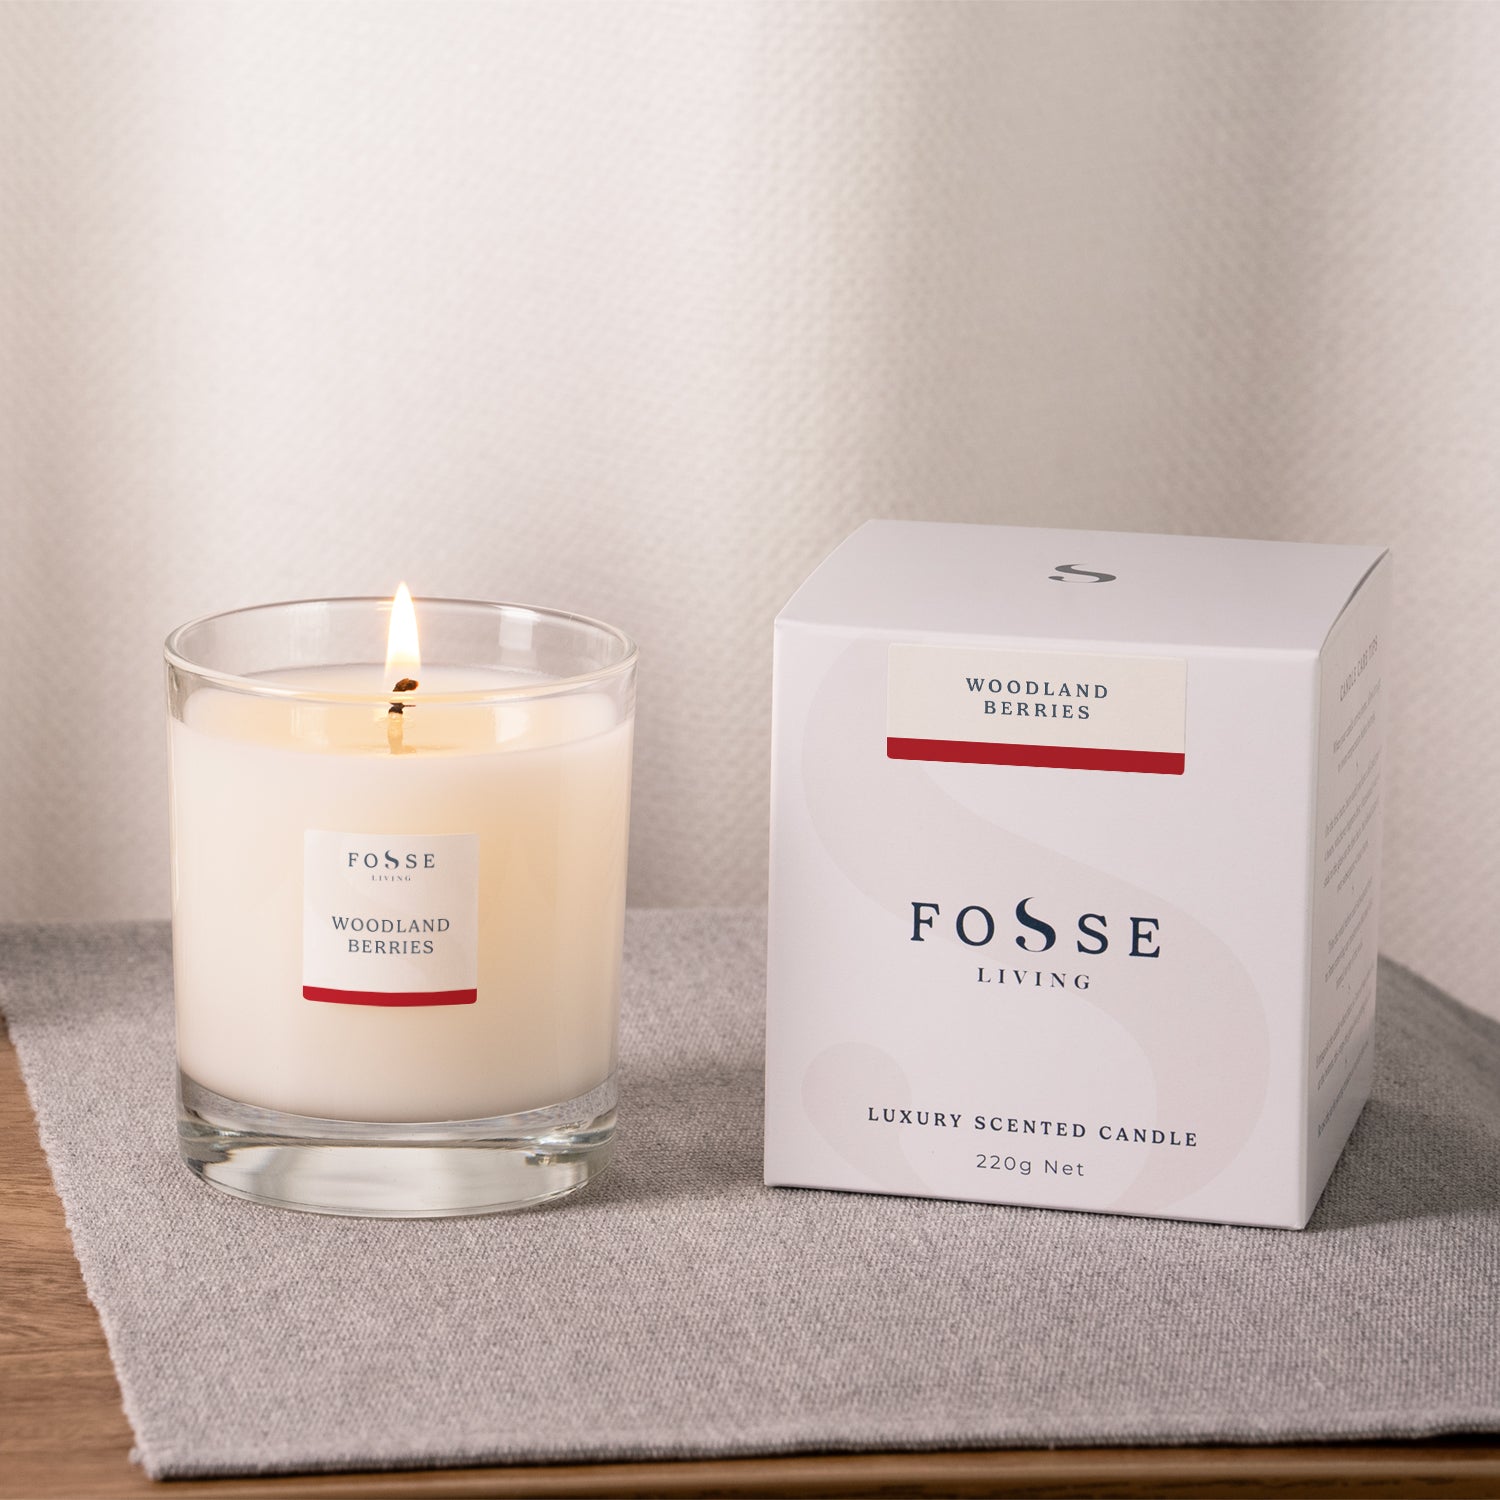 Woodland Berries Scented Candle - Fosse Living | Luxury Home Fragrances